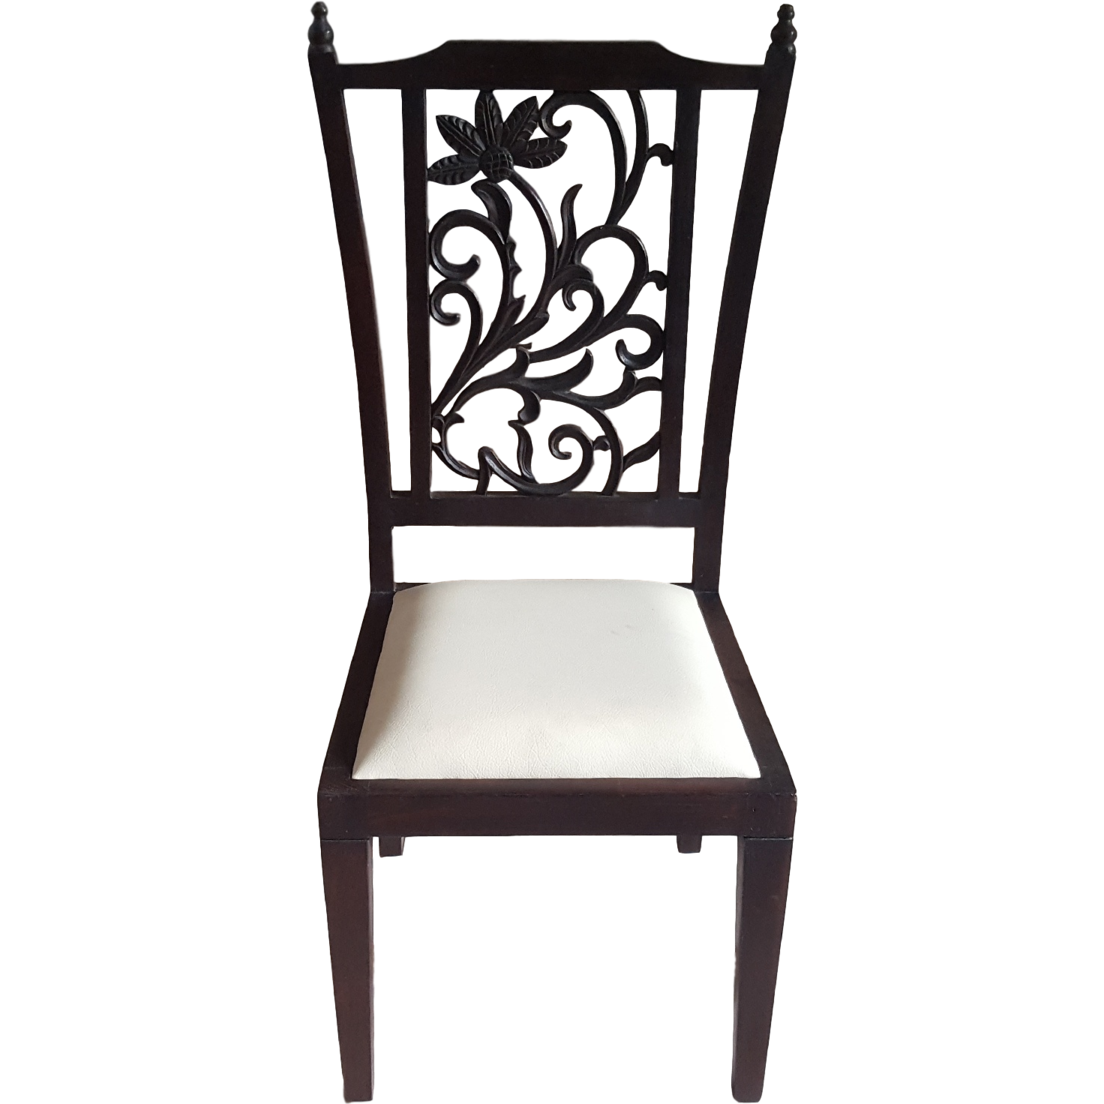 Teak Wood Carved Back Dining Chairs - Set of 6